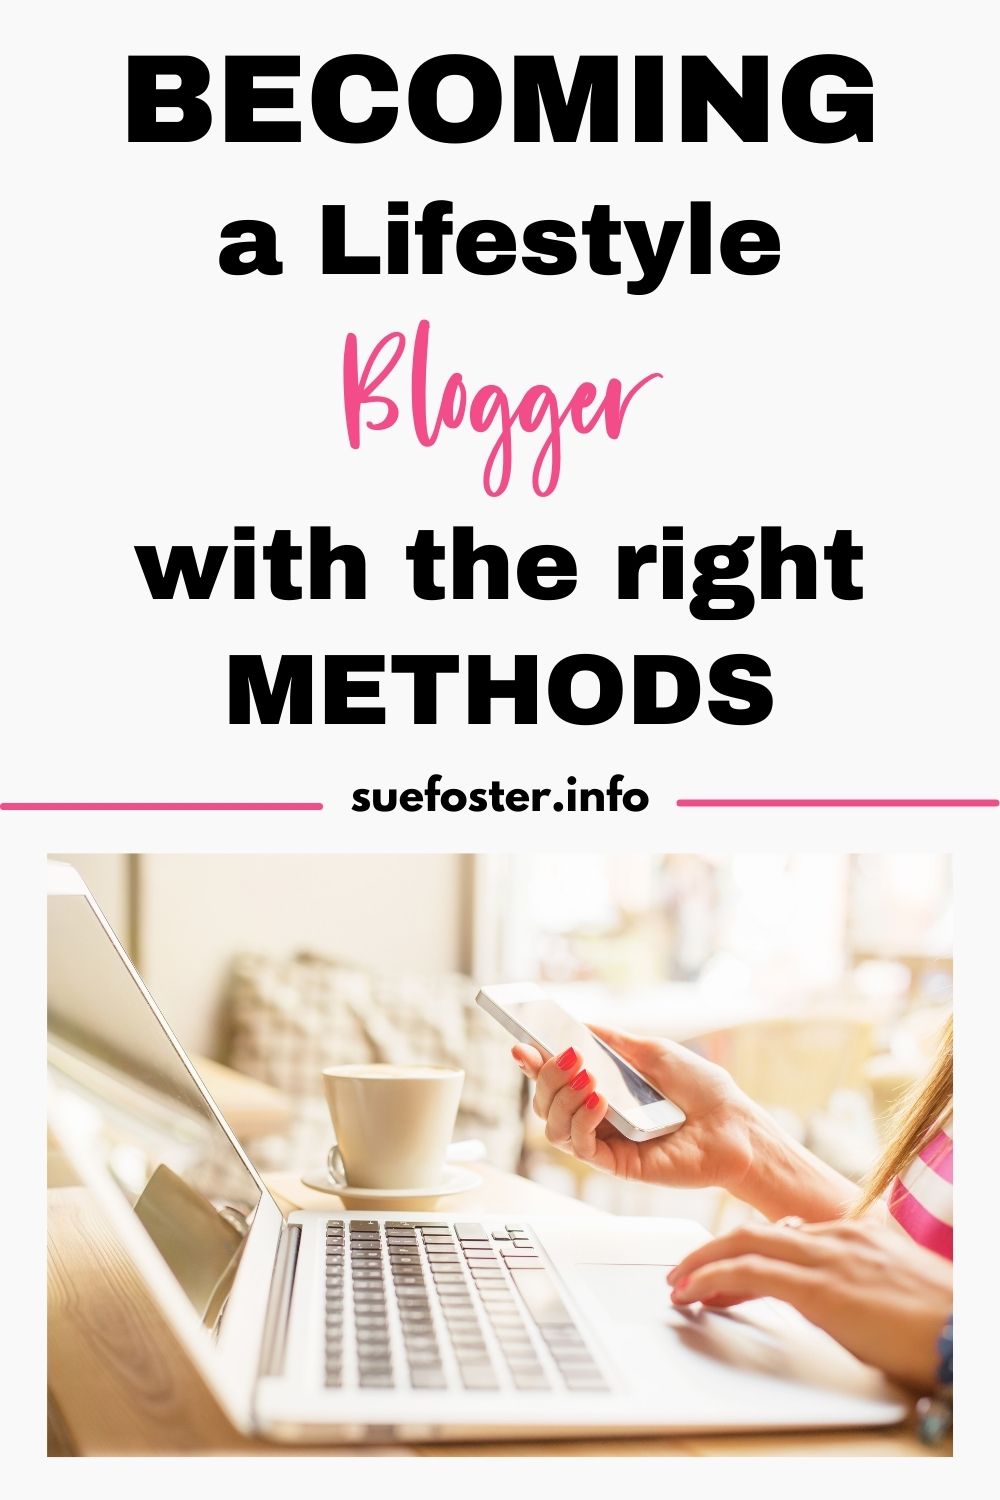 Are you interested in becoming a blogger for a living? It's best to know some strategies that have been proven successful by other lifestyle bloggers today.